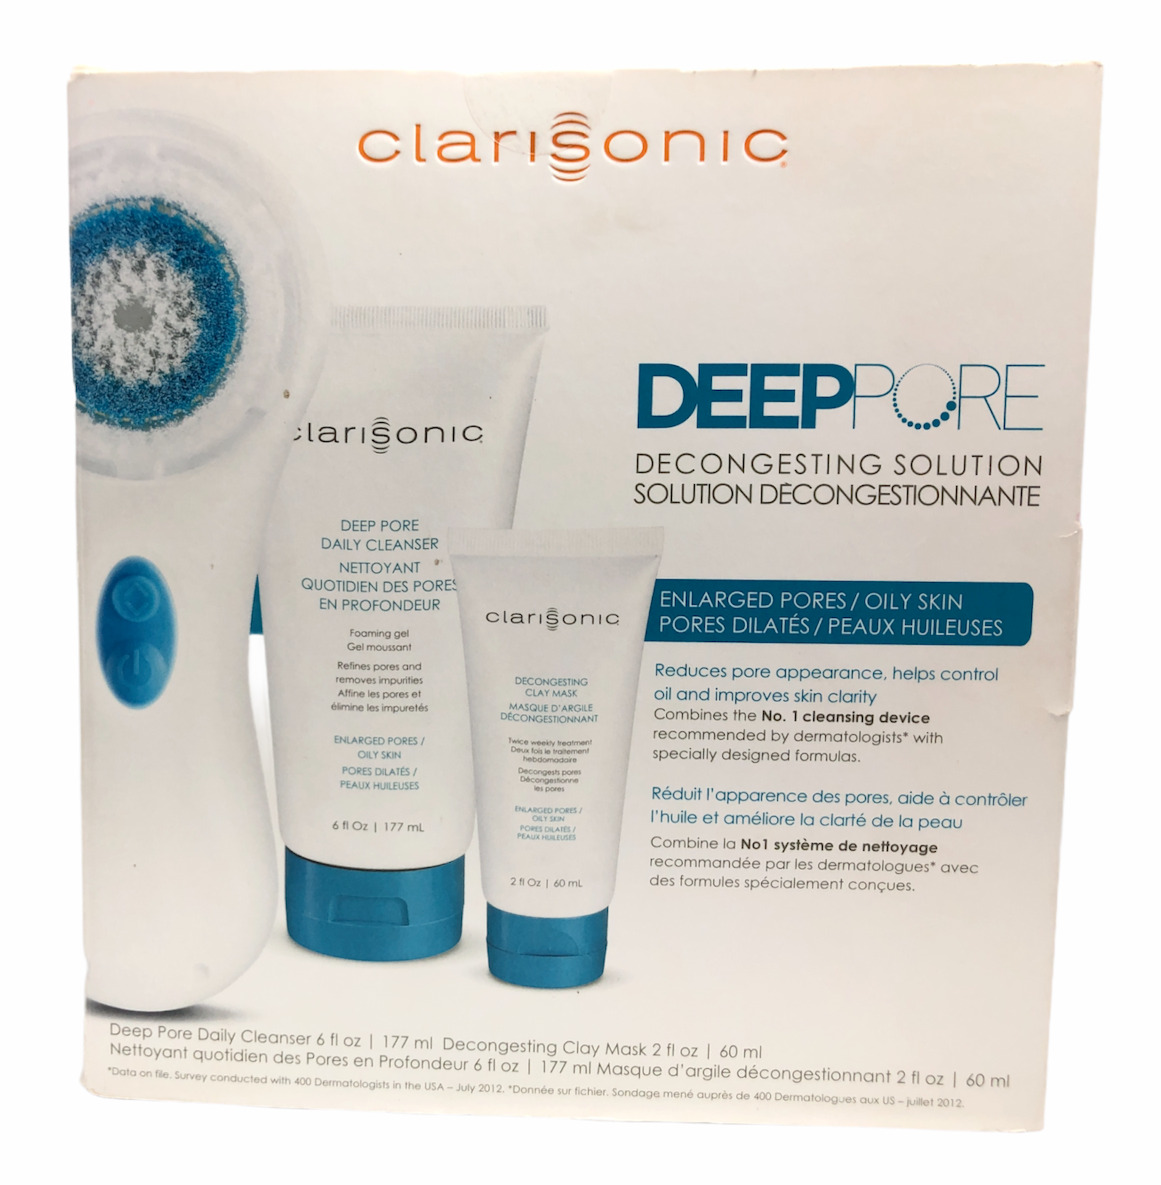 Clarisonic DeepPore Decongesting Solution Deep Pore Daily Cleanser/Clay Mask NEW